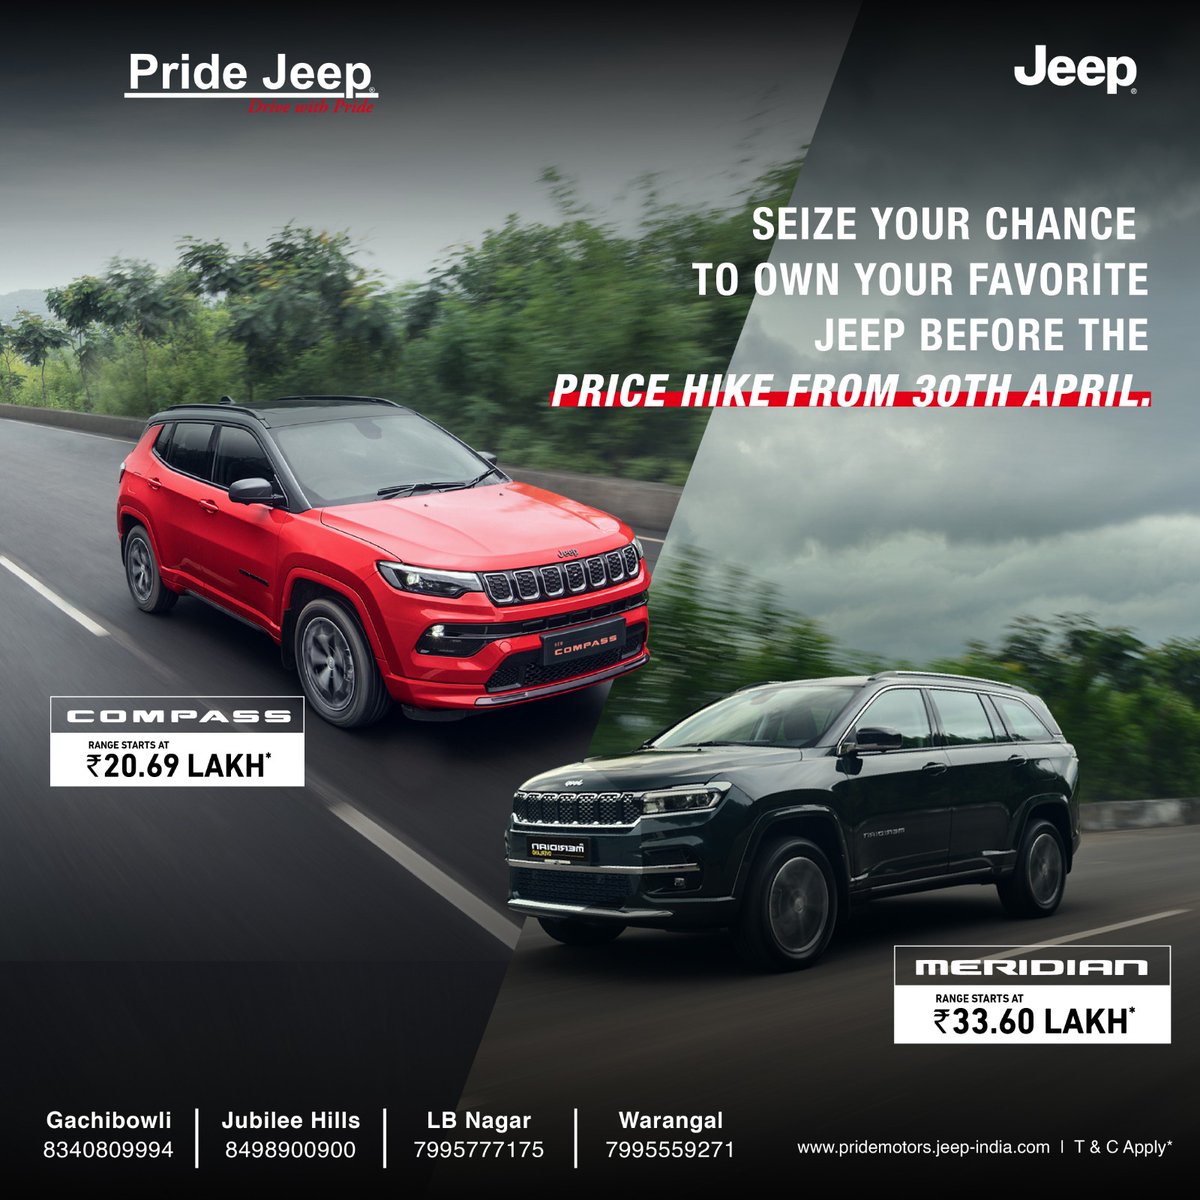 The time to escalate your driving experience is now! Make sure you own your favourite Jeep at the best price, today.

#Pridejeep #PrideJeepHyderabad #jeepcars #jeeplife #JeepJubileeHills #JeepGachibowli #JeepWarangal #Jeeplbnagar #jeepcompass #jeepcompassindia #jeepmeridian